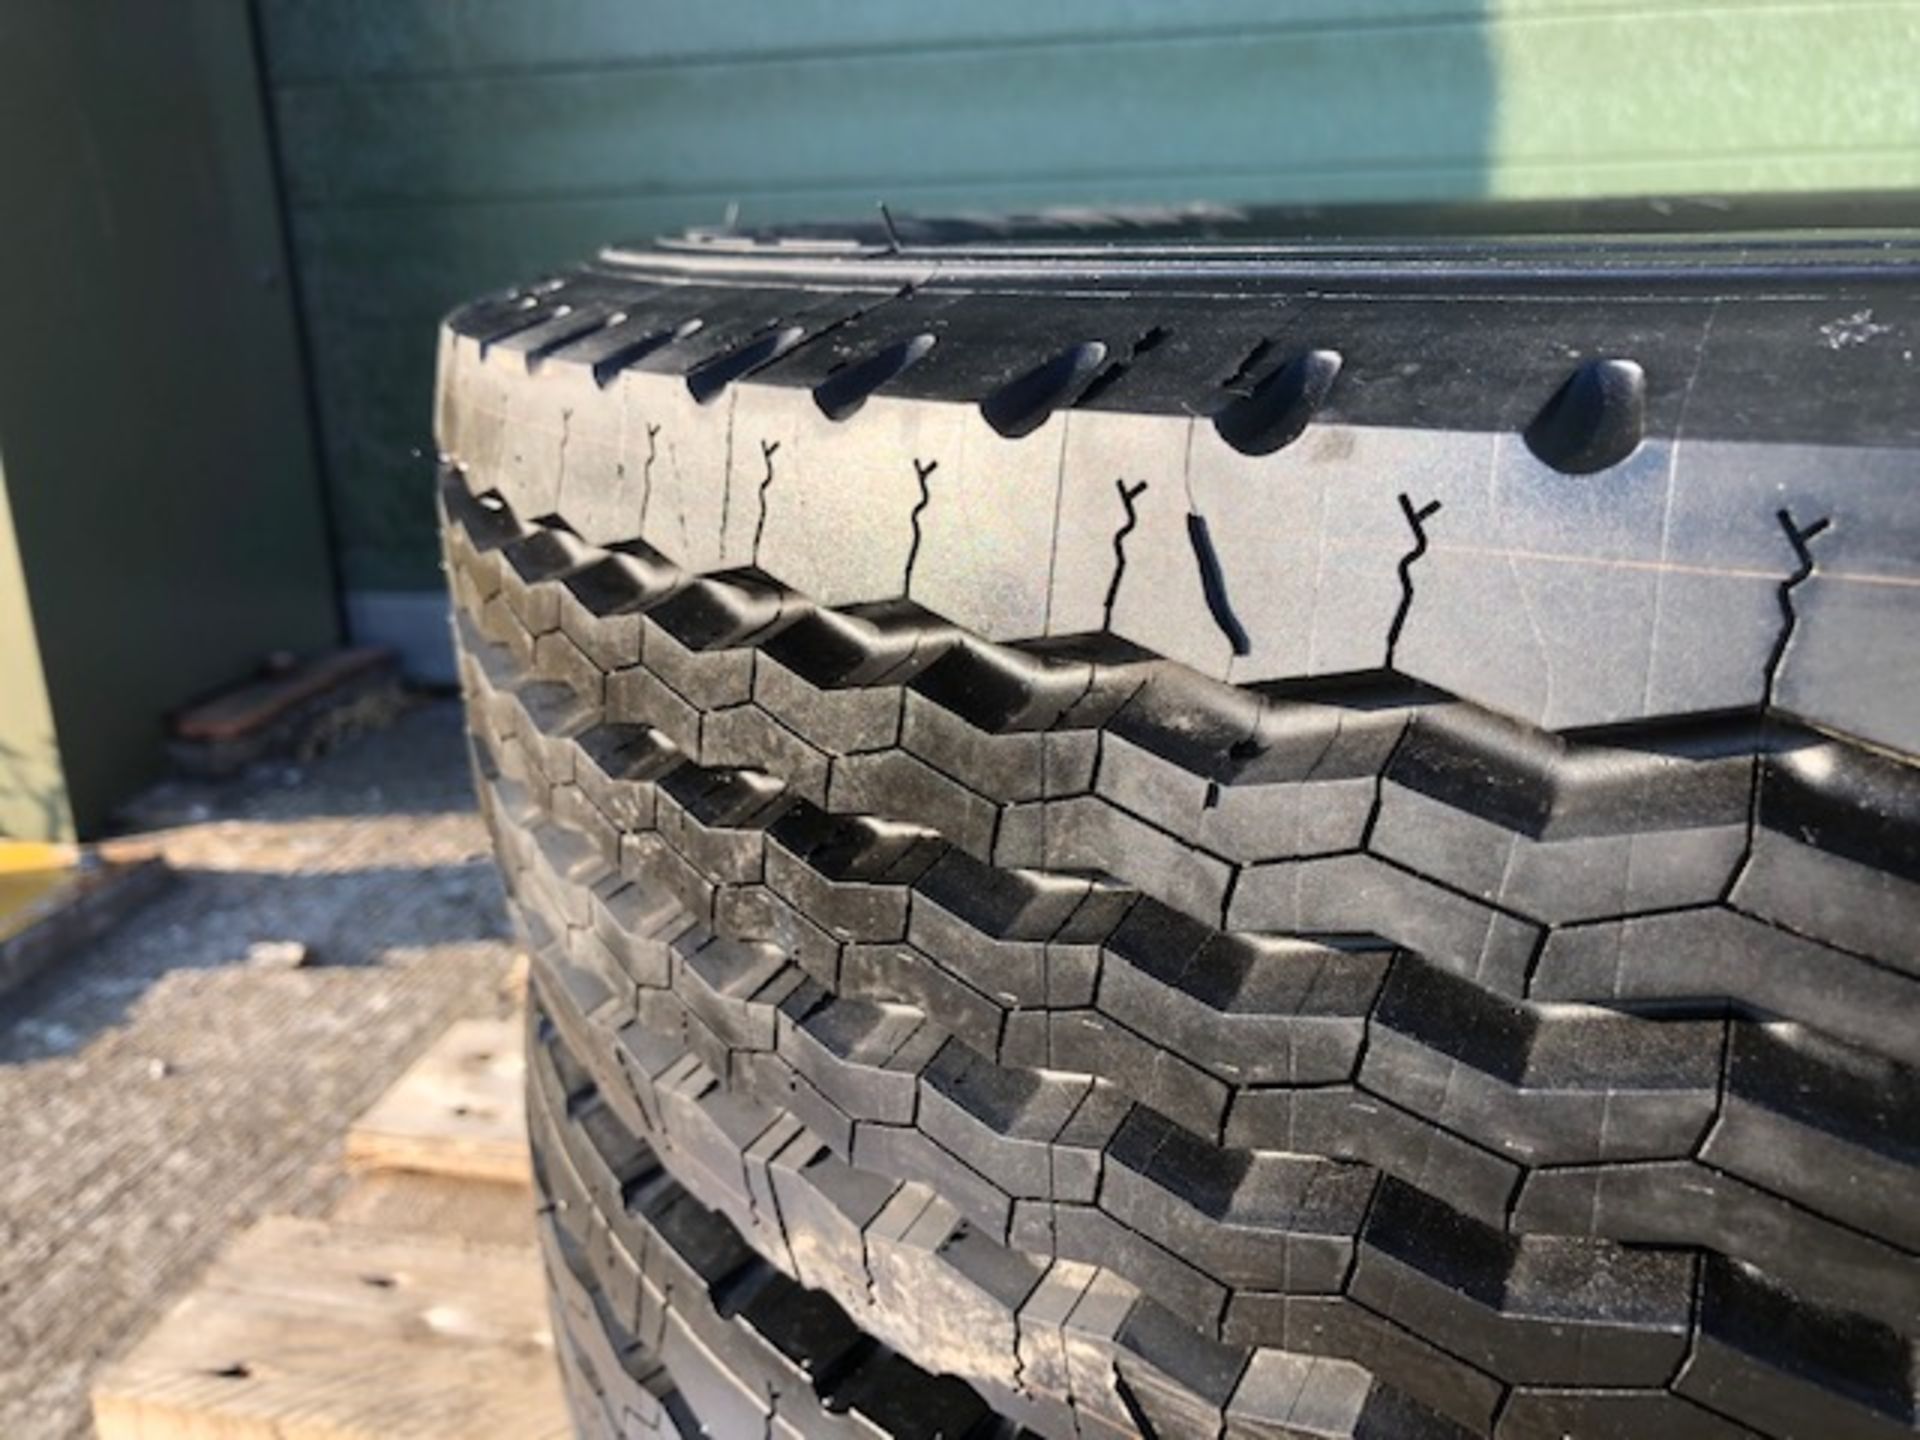 Qty 2 x 7.5R16 Michelin XZAI Tyres 14 Ply rating unused with bobbles - Image 2 of 7